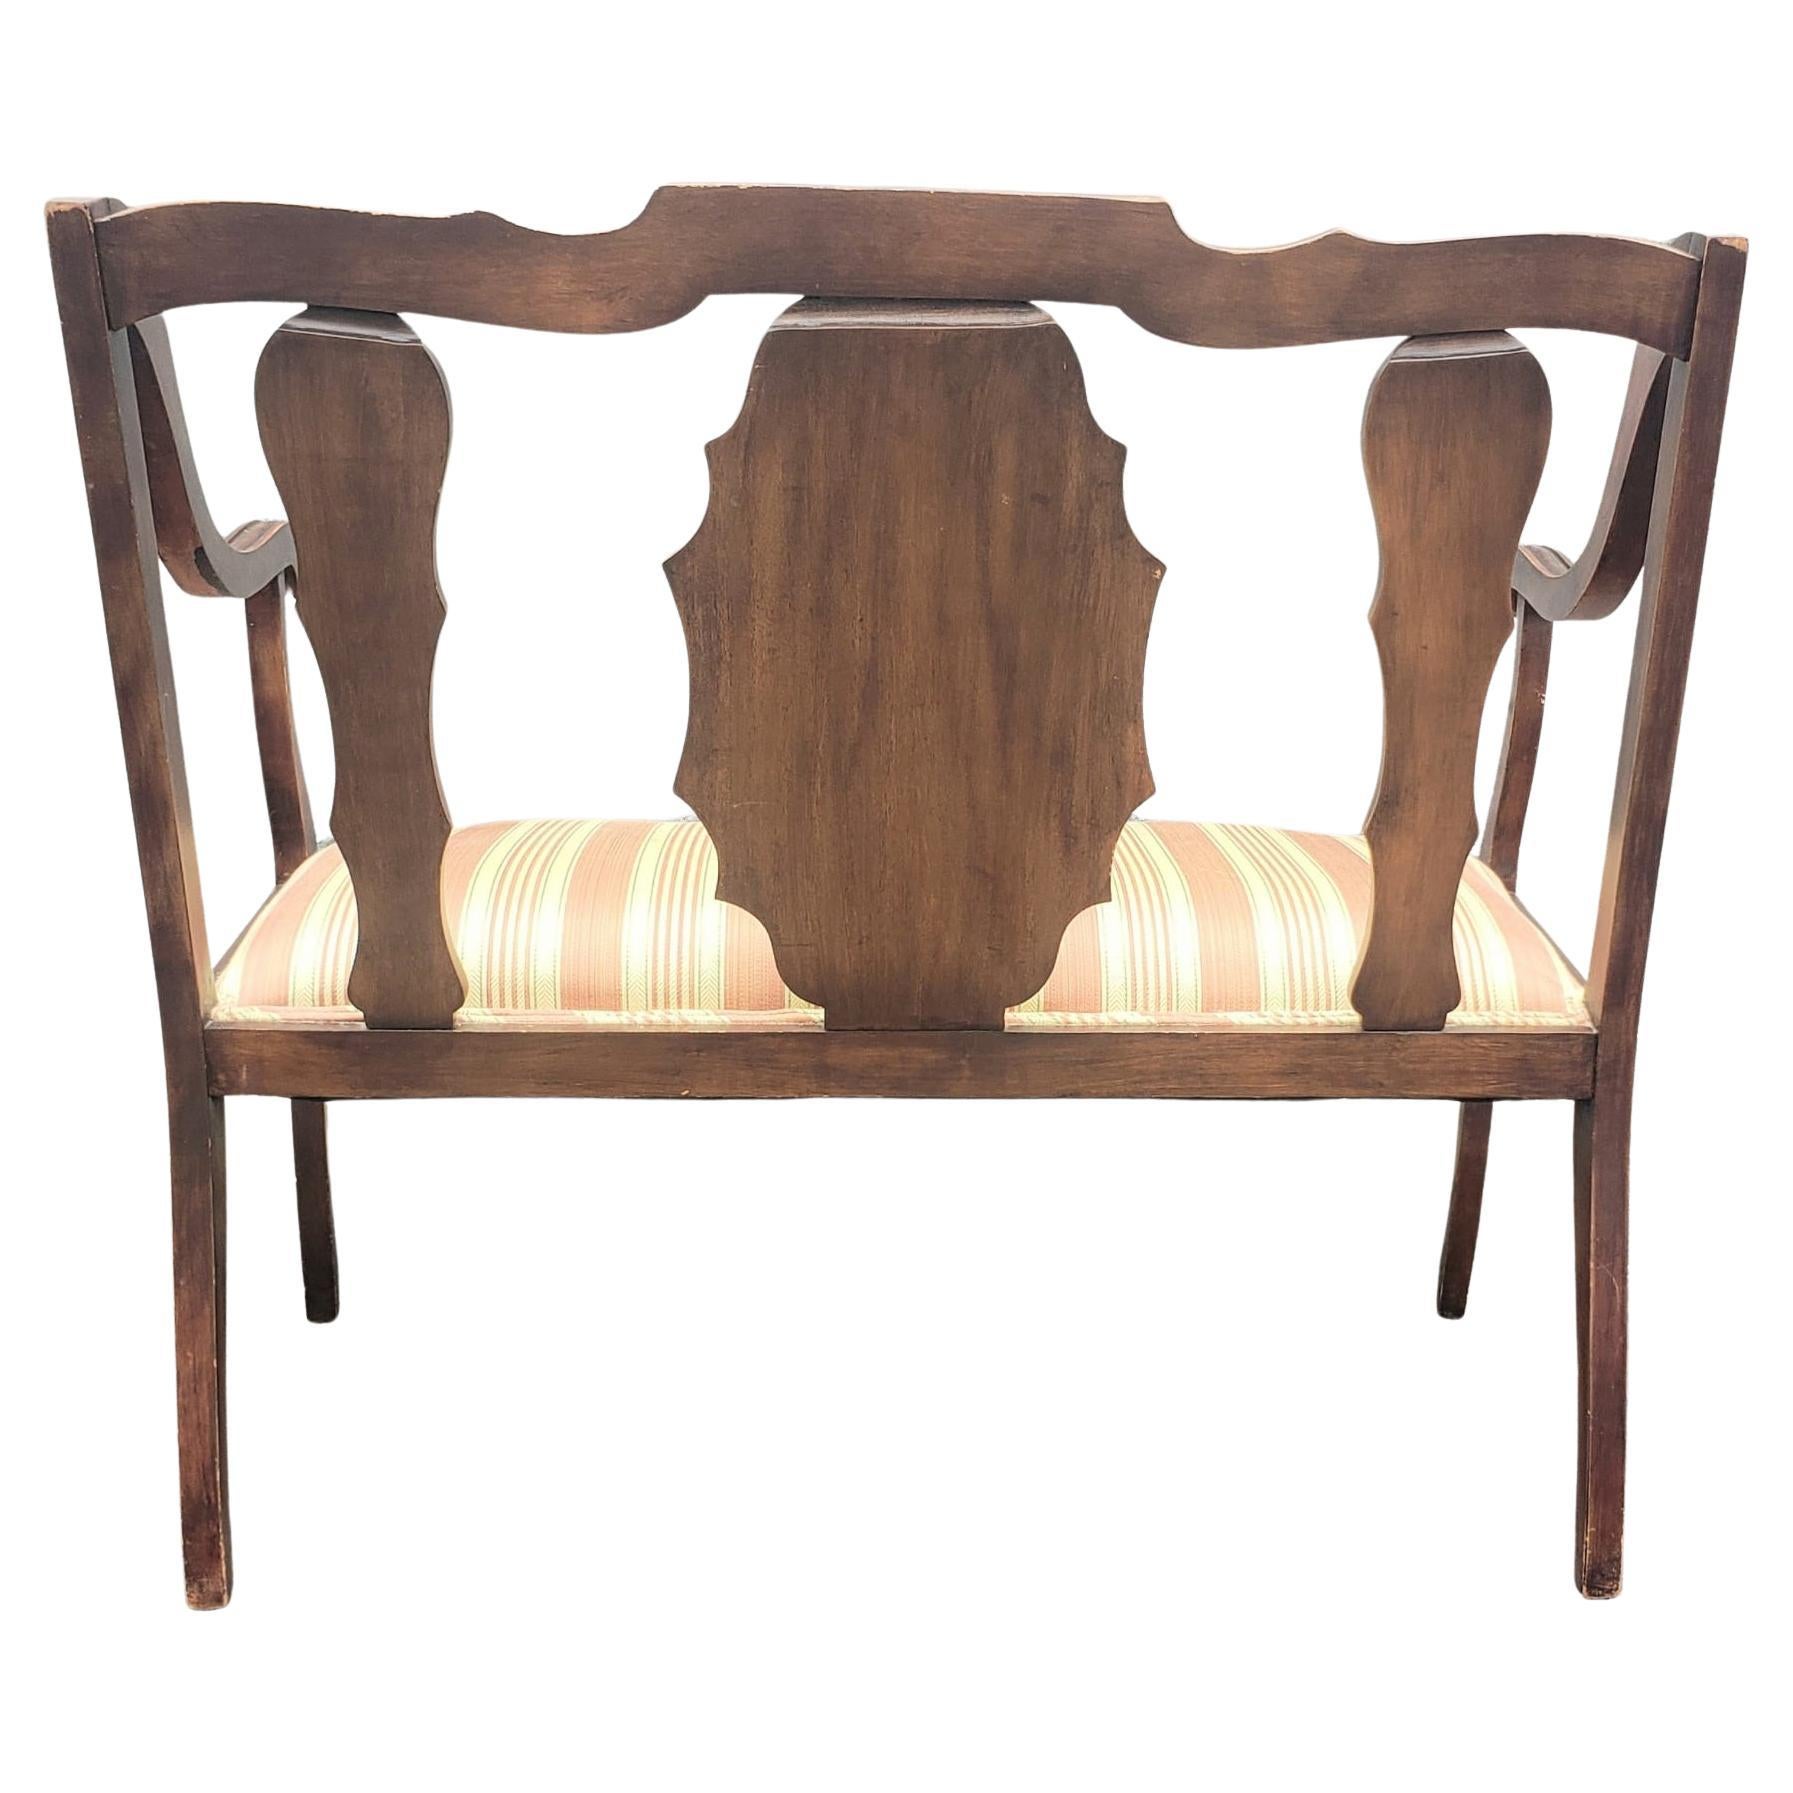 20th Century George III Style Walnut with Inlay and Upholstered Seat Settee For Sale 1